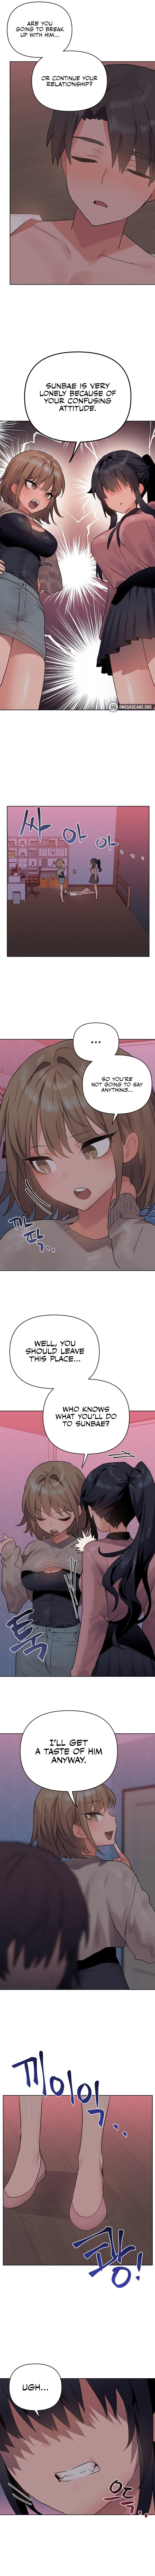 Do You Wanna Fight in This Life, Too? - Chapter 4 Page 3